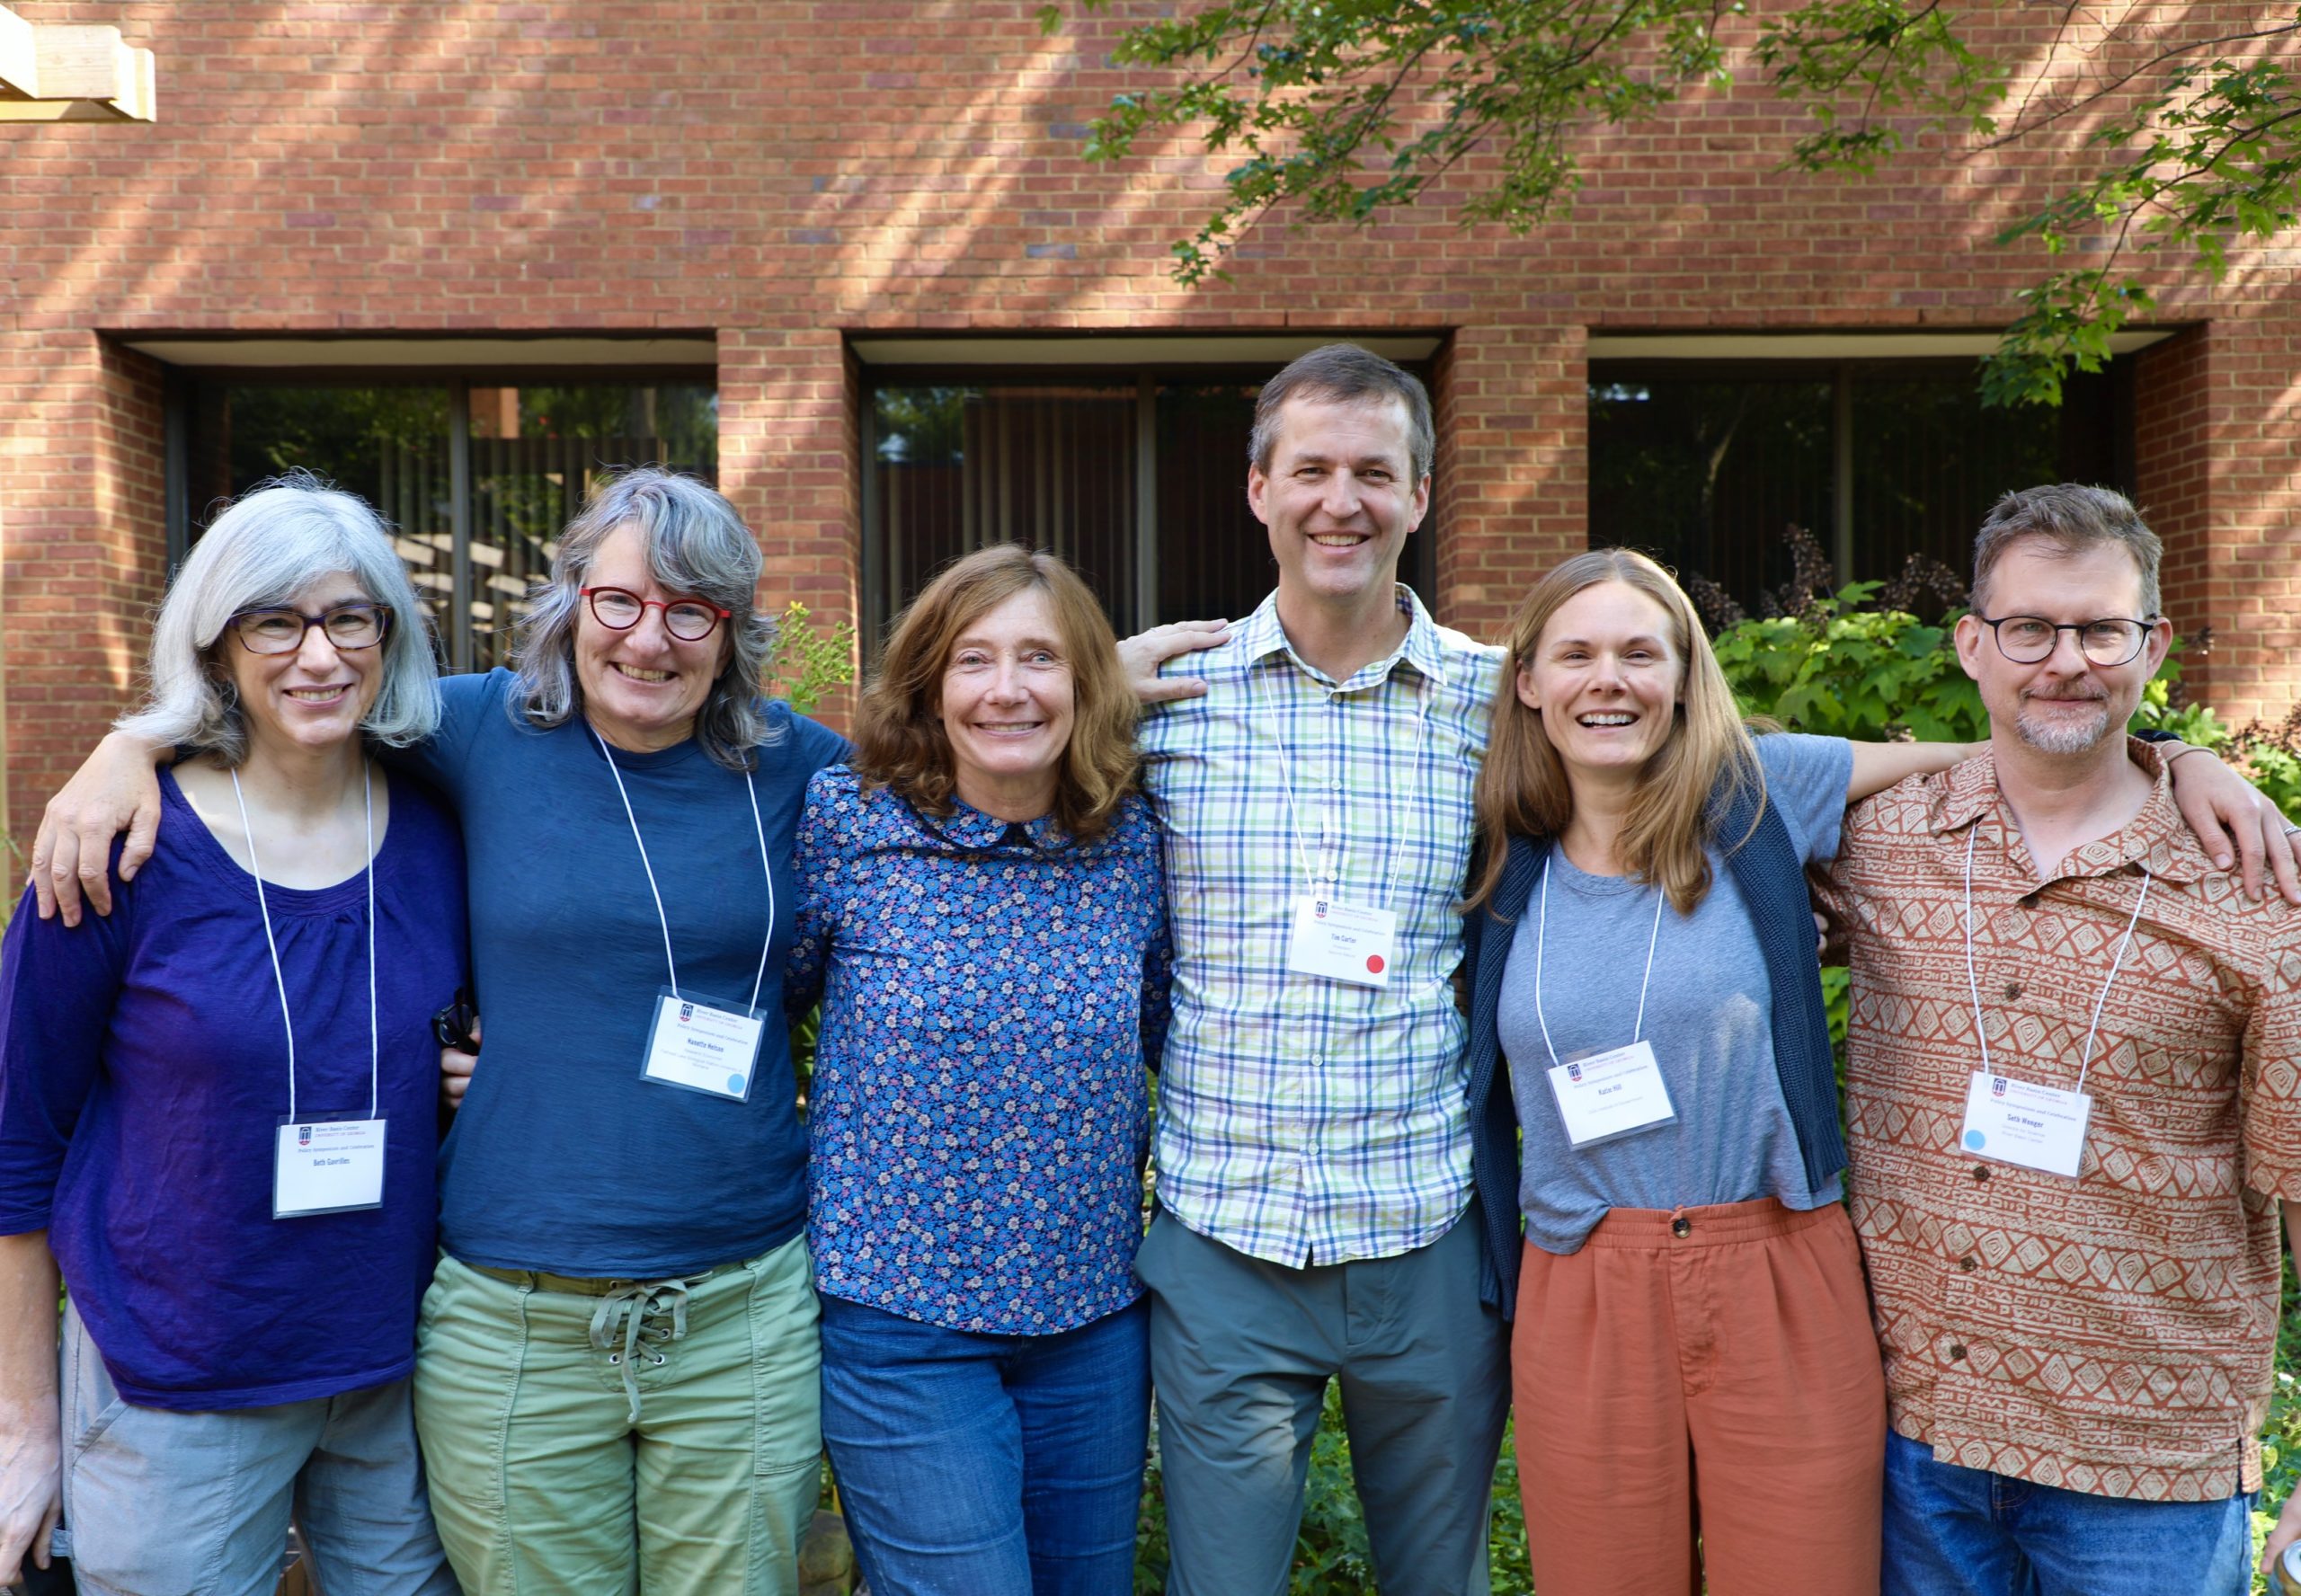 Left to right: Beth Gavrilles, Nanette Nelson, Laurie Fowler, Tim Carter, Katie Hill and Seth Wenger.